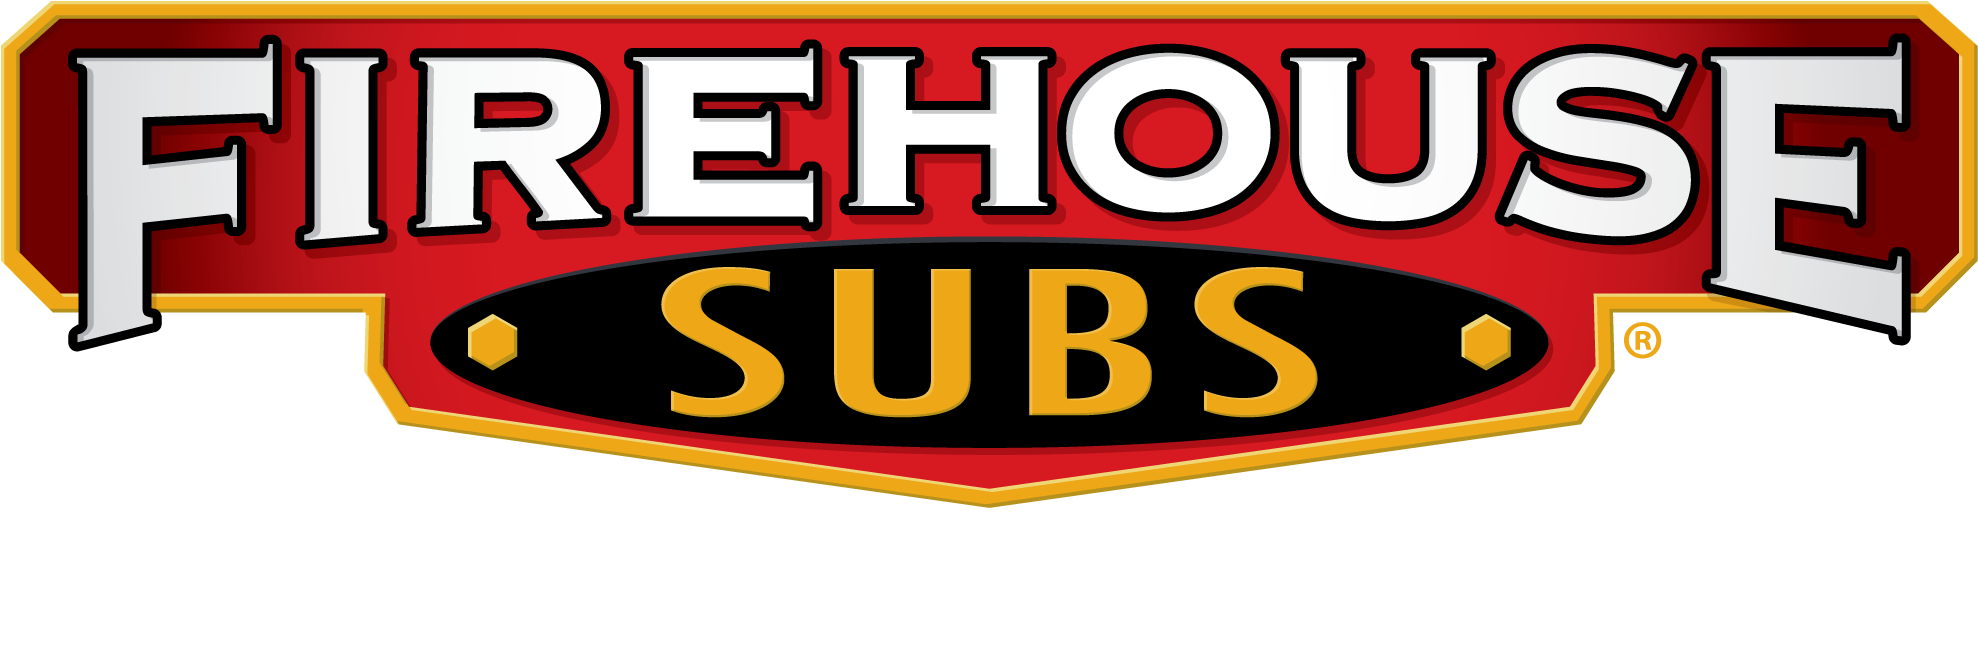 Firehouse Subs - Fire House Subs Png (2500x909)